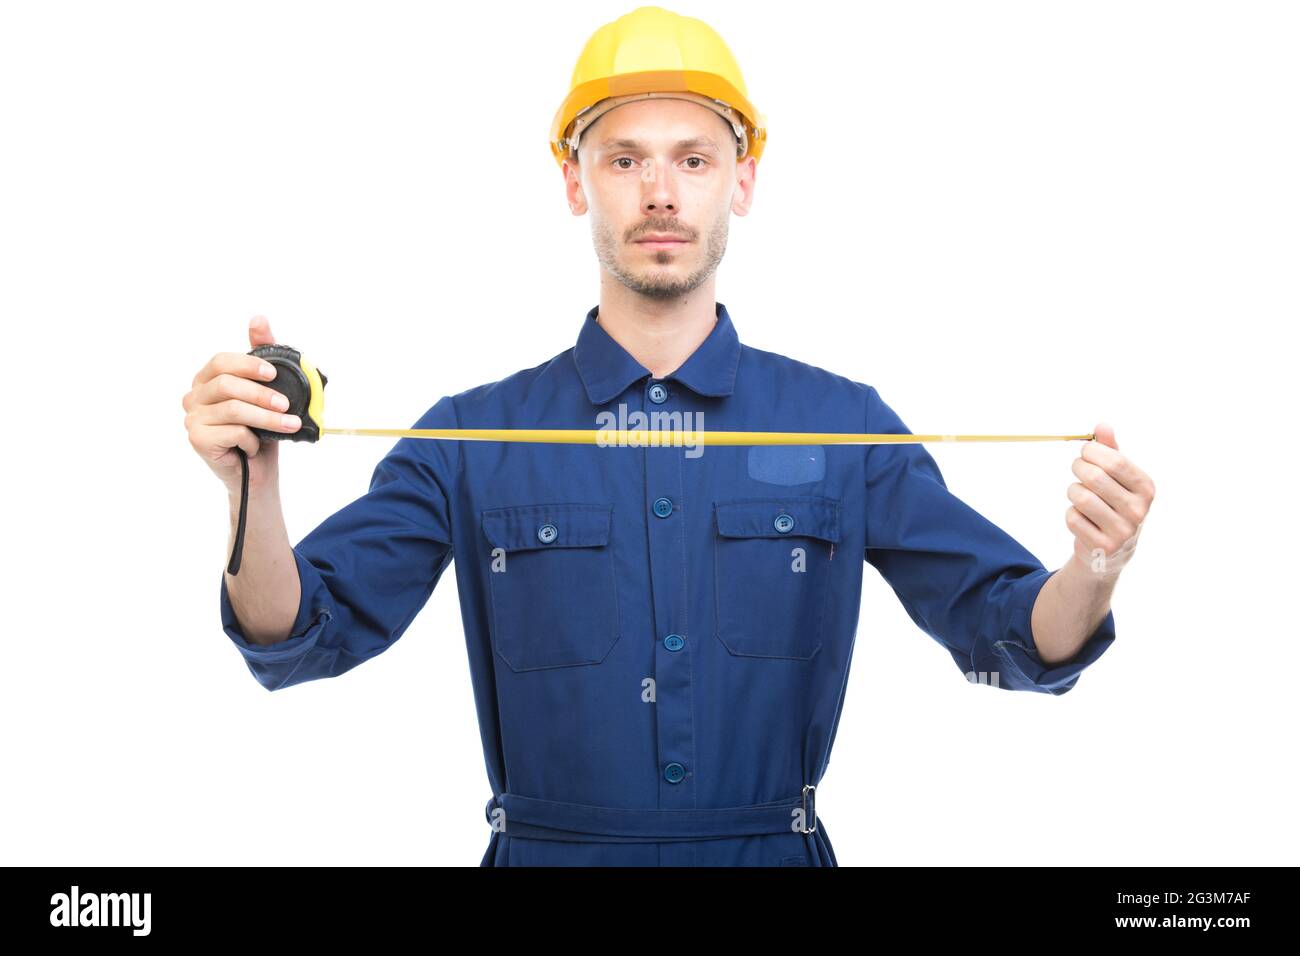 Horizontal portrait of successful handsome Caucasian construction engineer wearing uniform with hardhat measuring width or length of something Stock Photo